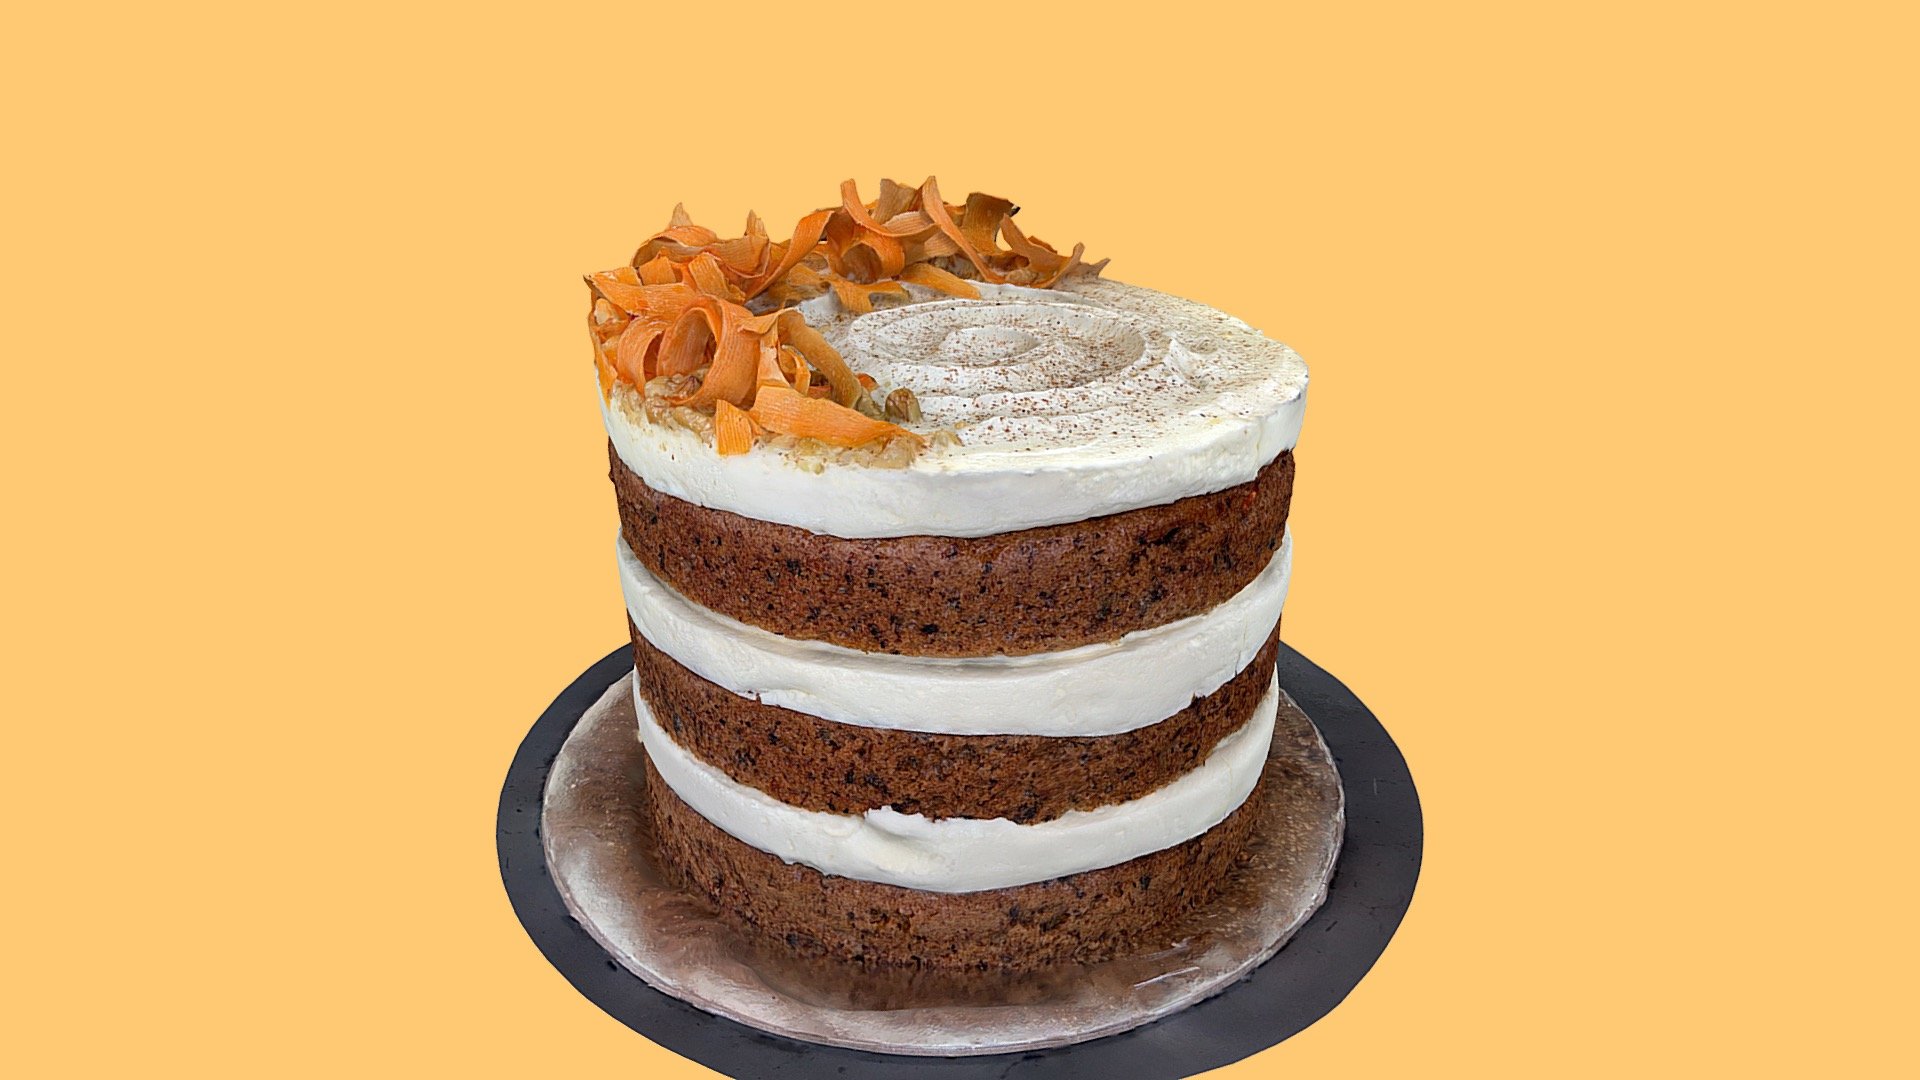 Carrot birthday cake, filled with sultanas and walnuts. 

Created with Polycam using ~300 photos - Carrot Cake - Download Free 3D model by Andrei Alexandrescu (@Andrei_Alexandrescu) 3d model